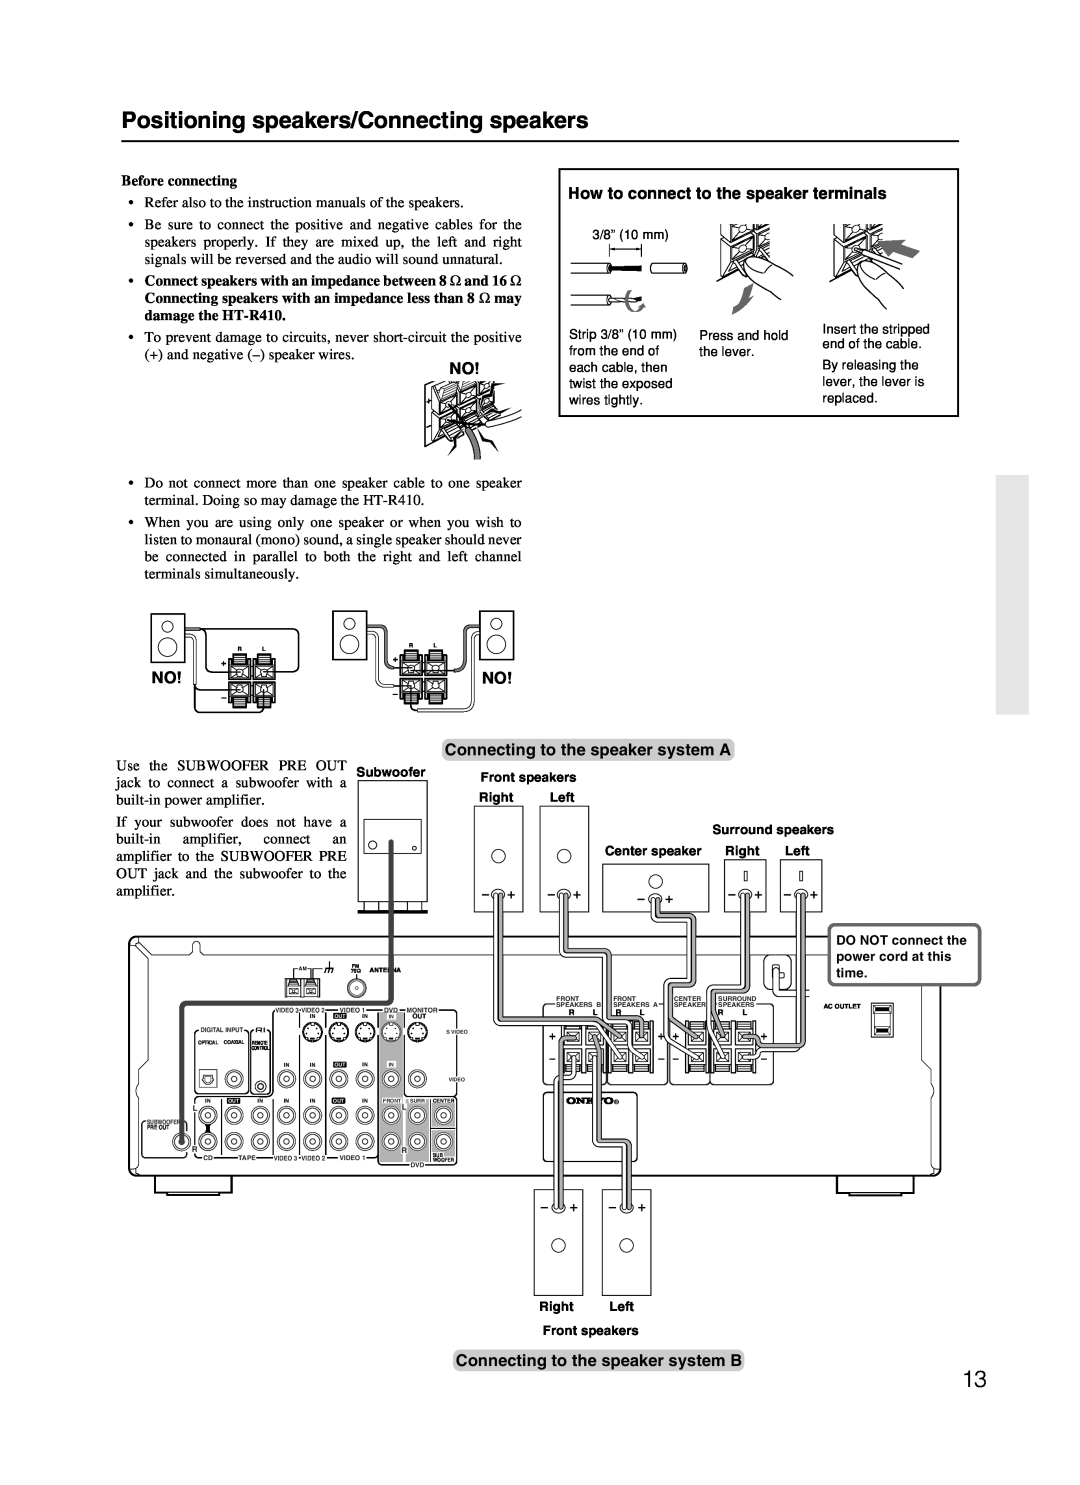 Onkyo HT-R410 appendix Positioning speakers/Connecting speakers, How to connect to the speaker terminals, Before connecting 